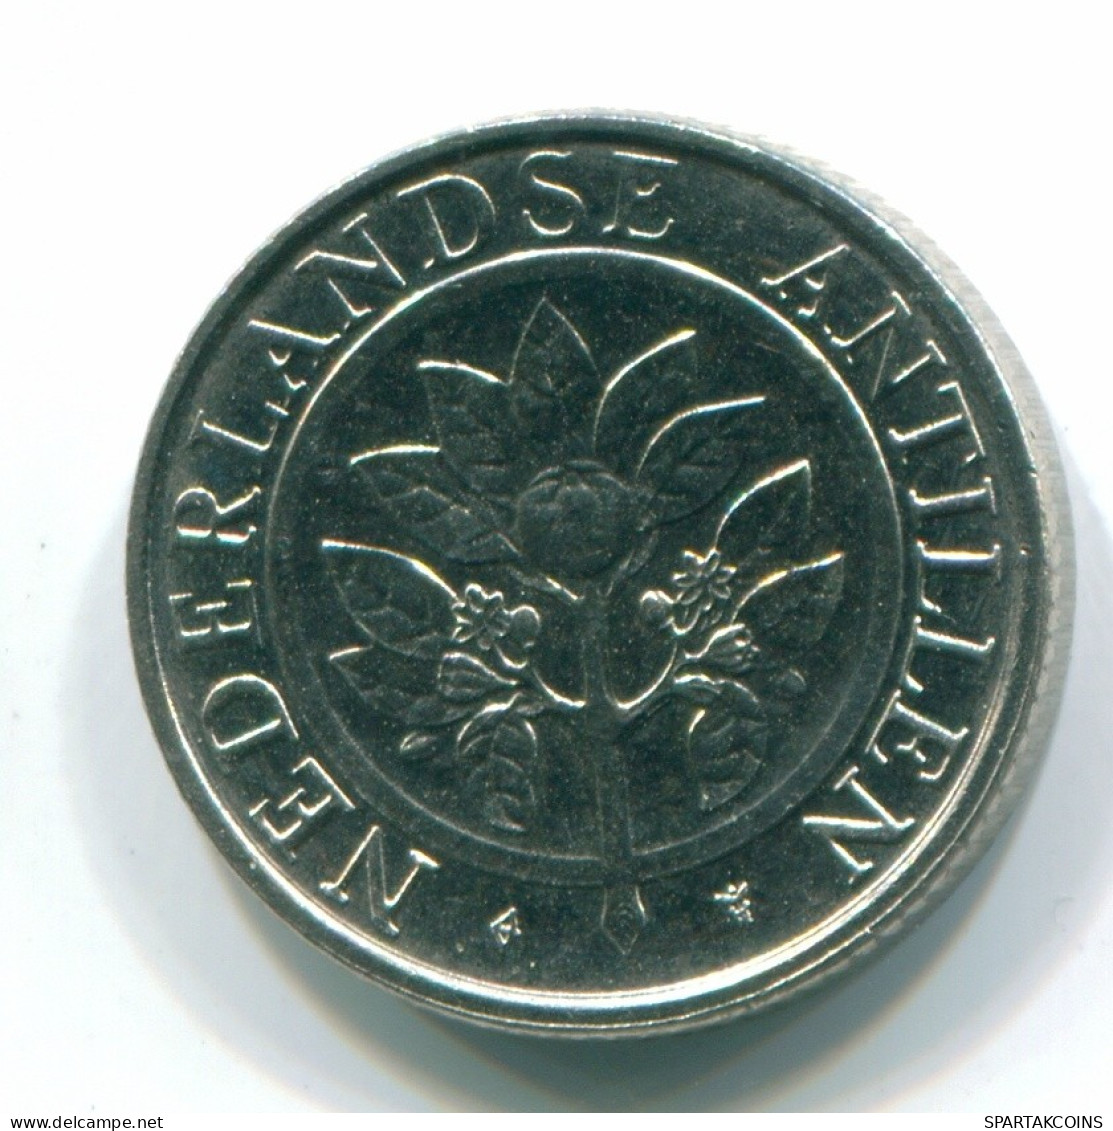 10 CENTS 1991 NETHERLANDS ANTILLES Nickel Colonial Coin #S11320.U.A - Antille Olandesi